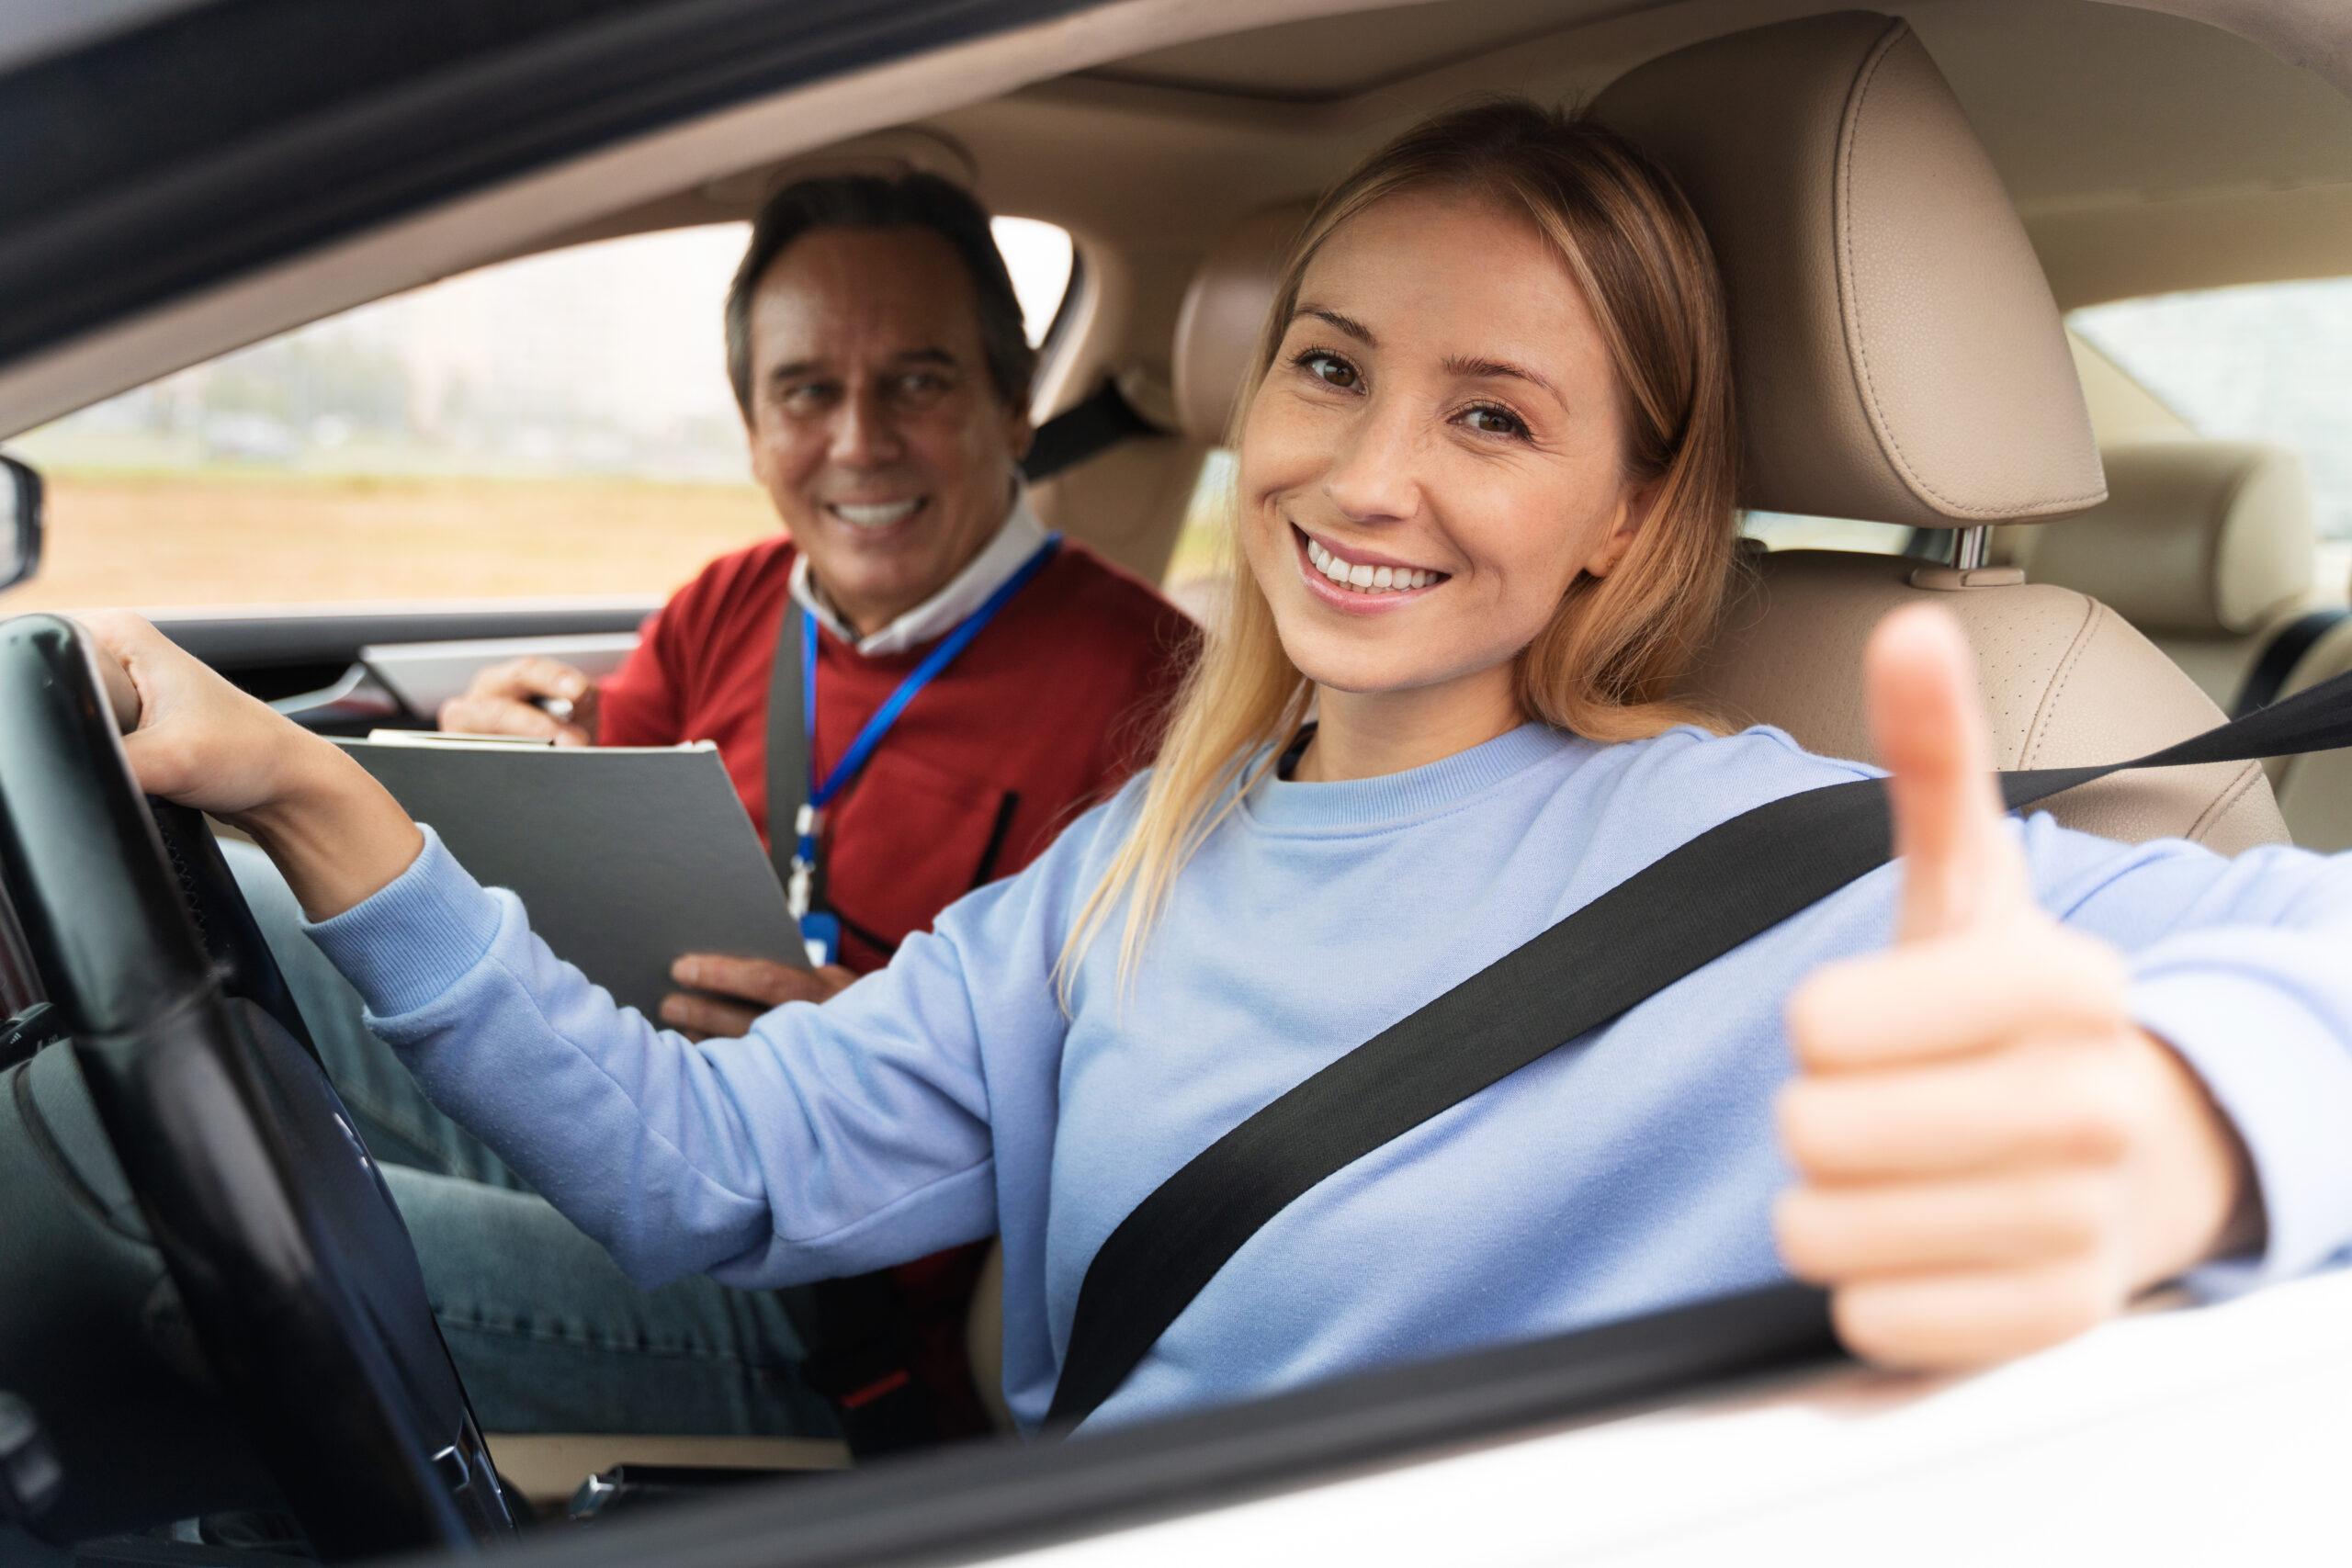 teen driver insurance - teen driving with driving instructor concept image.